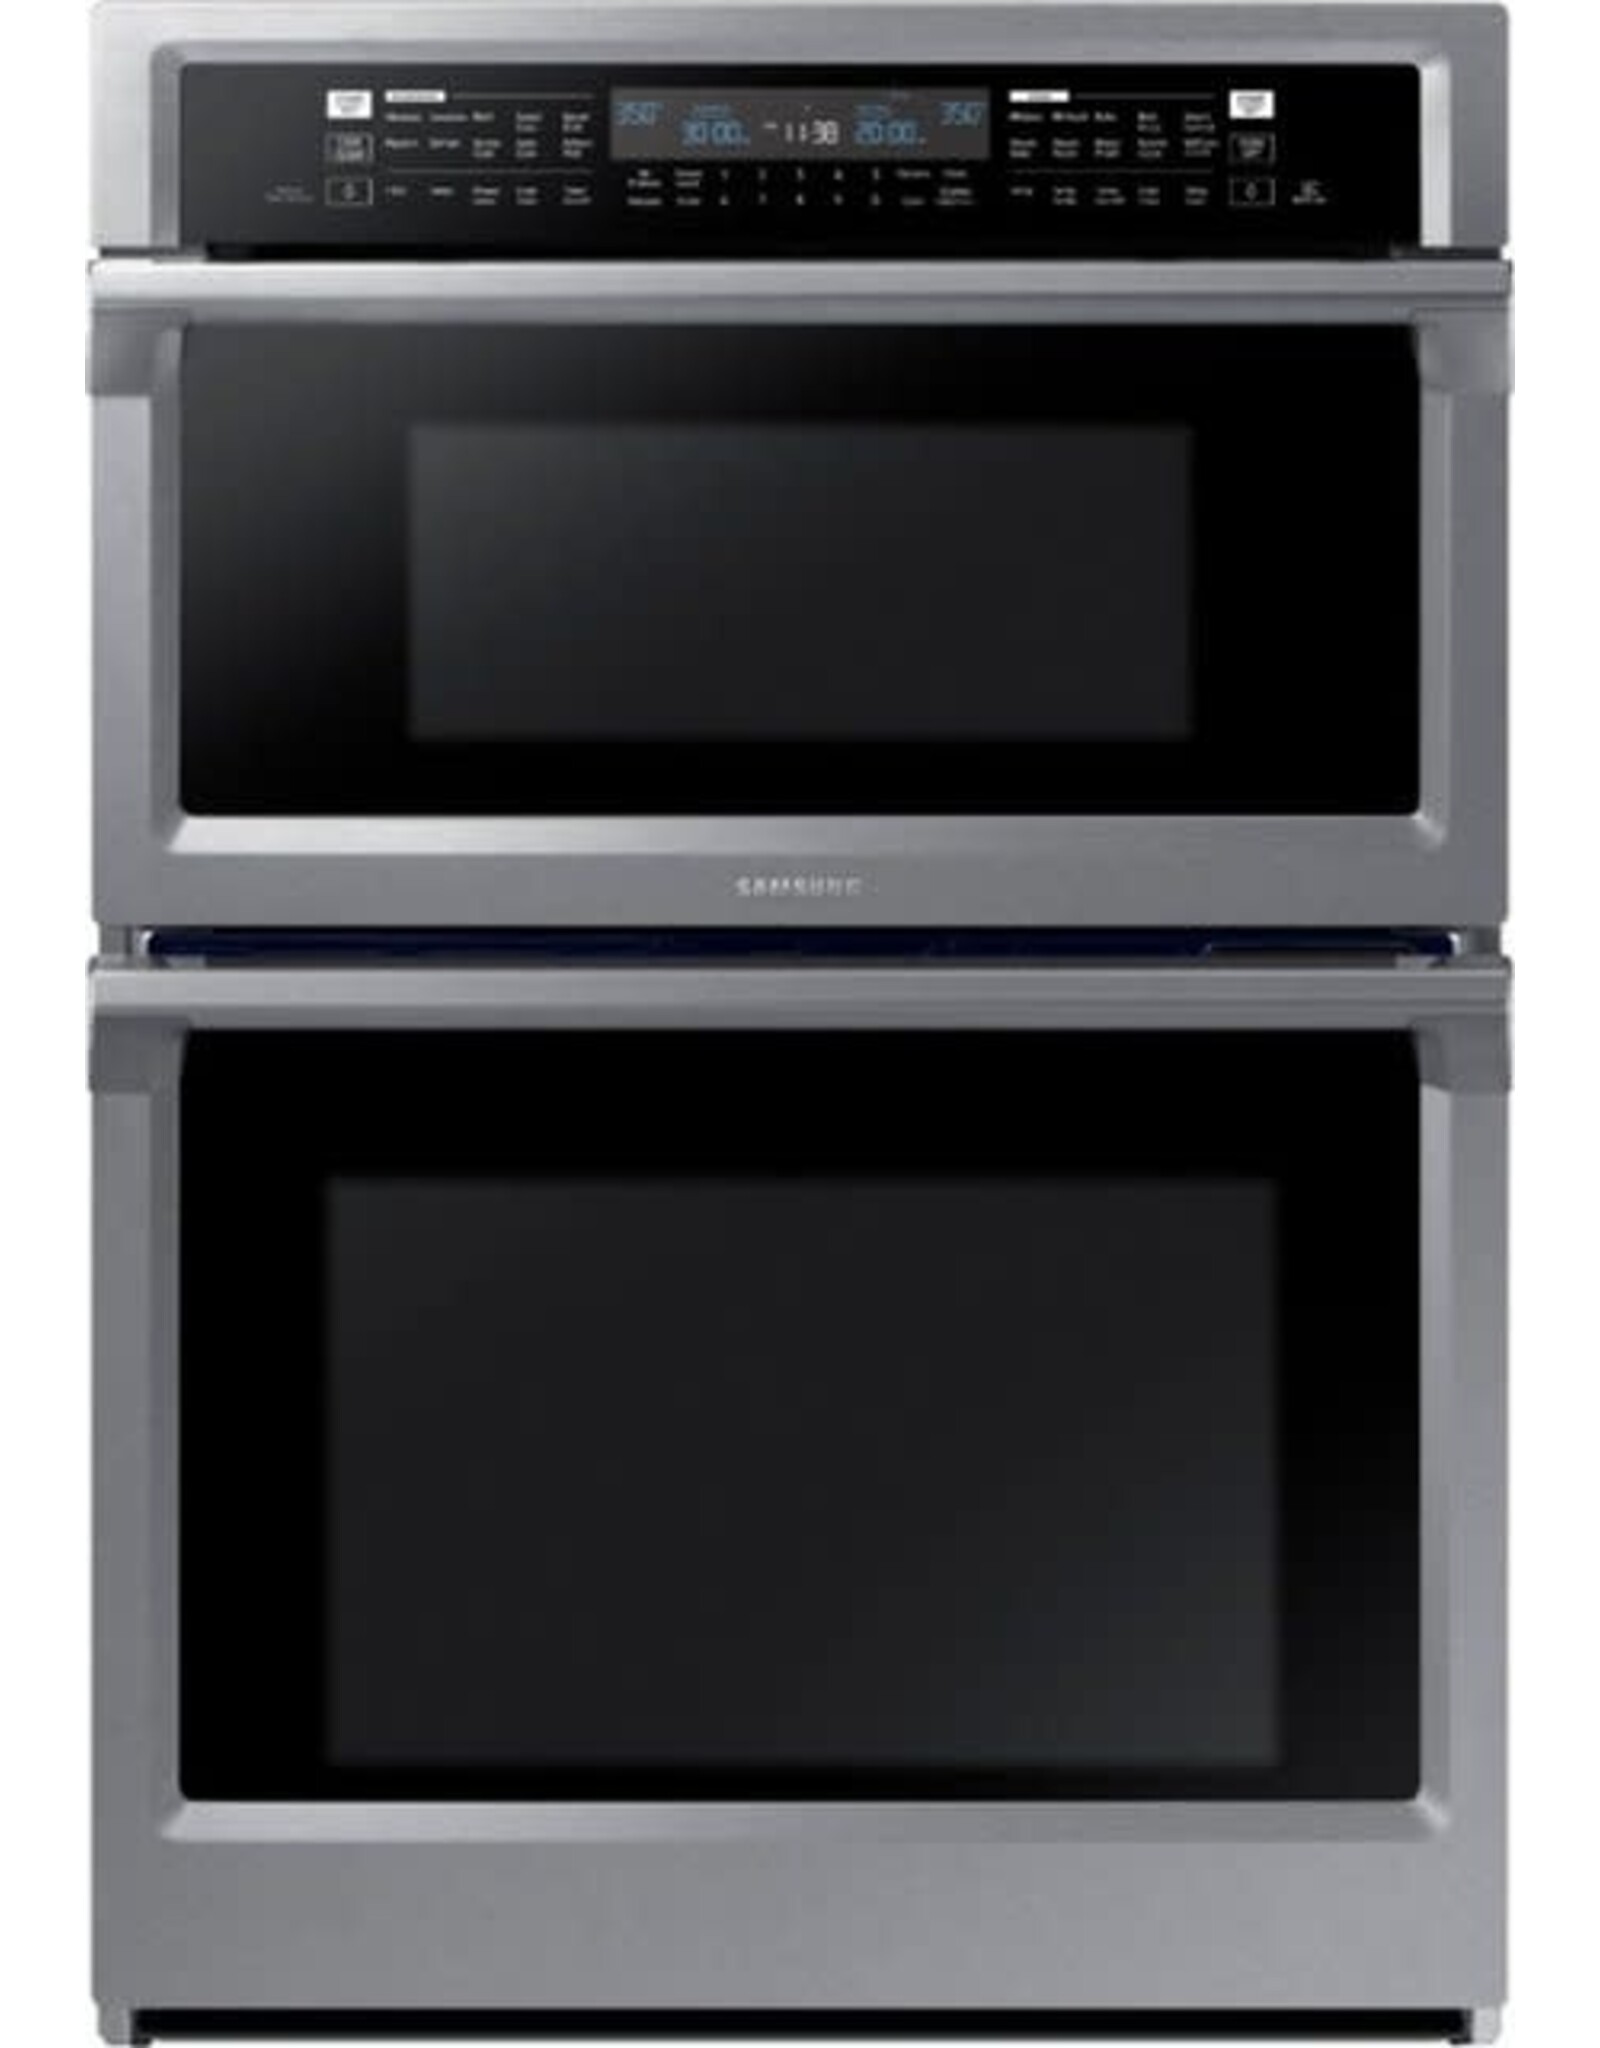 SAMSUNG NQ70M6650DS Samsung - 30" Microwave Combination Wall Oven with Steam Cook and WiFi - Stainless Steel